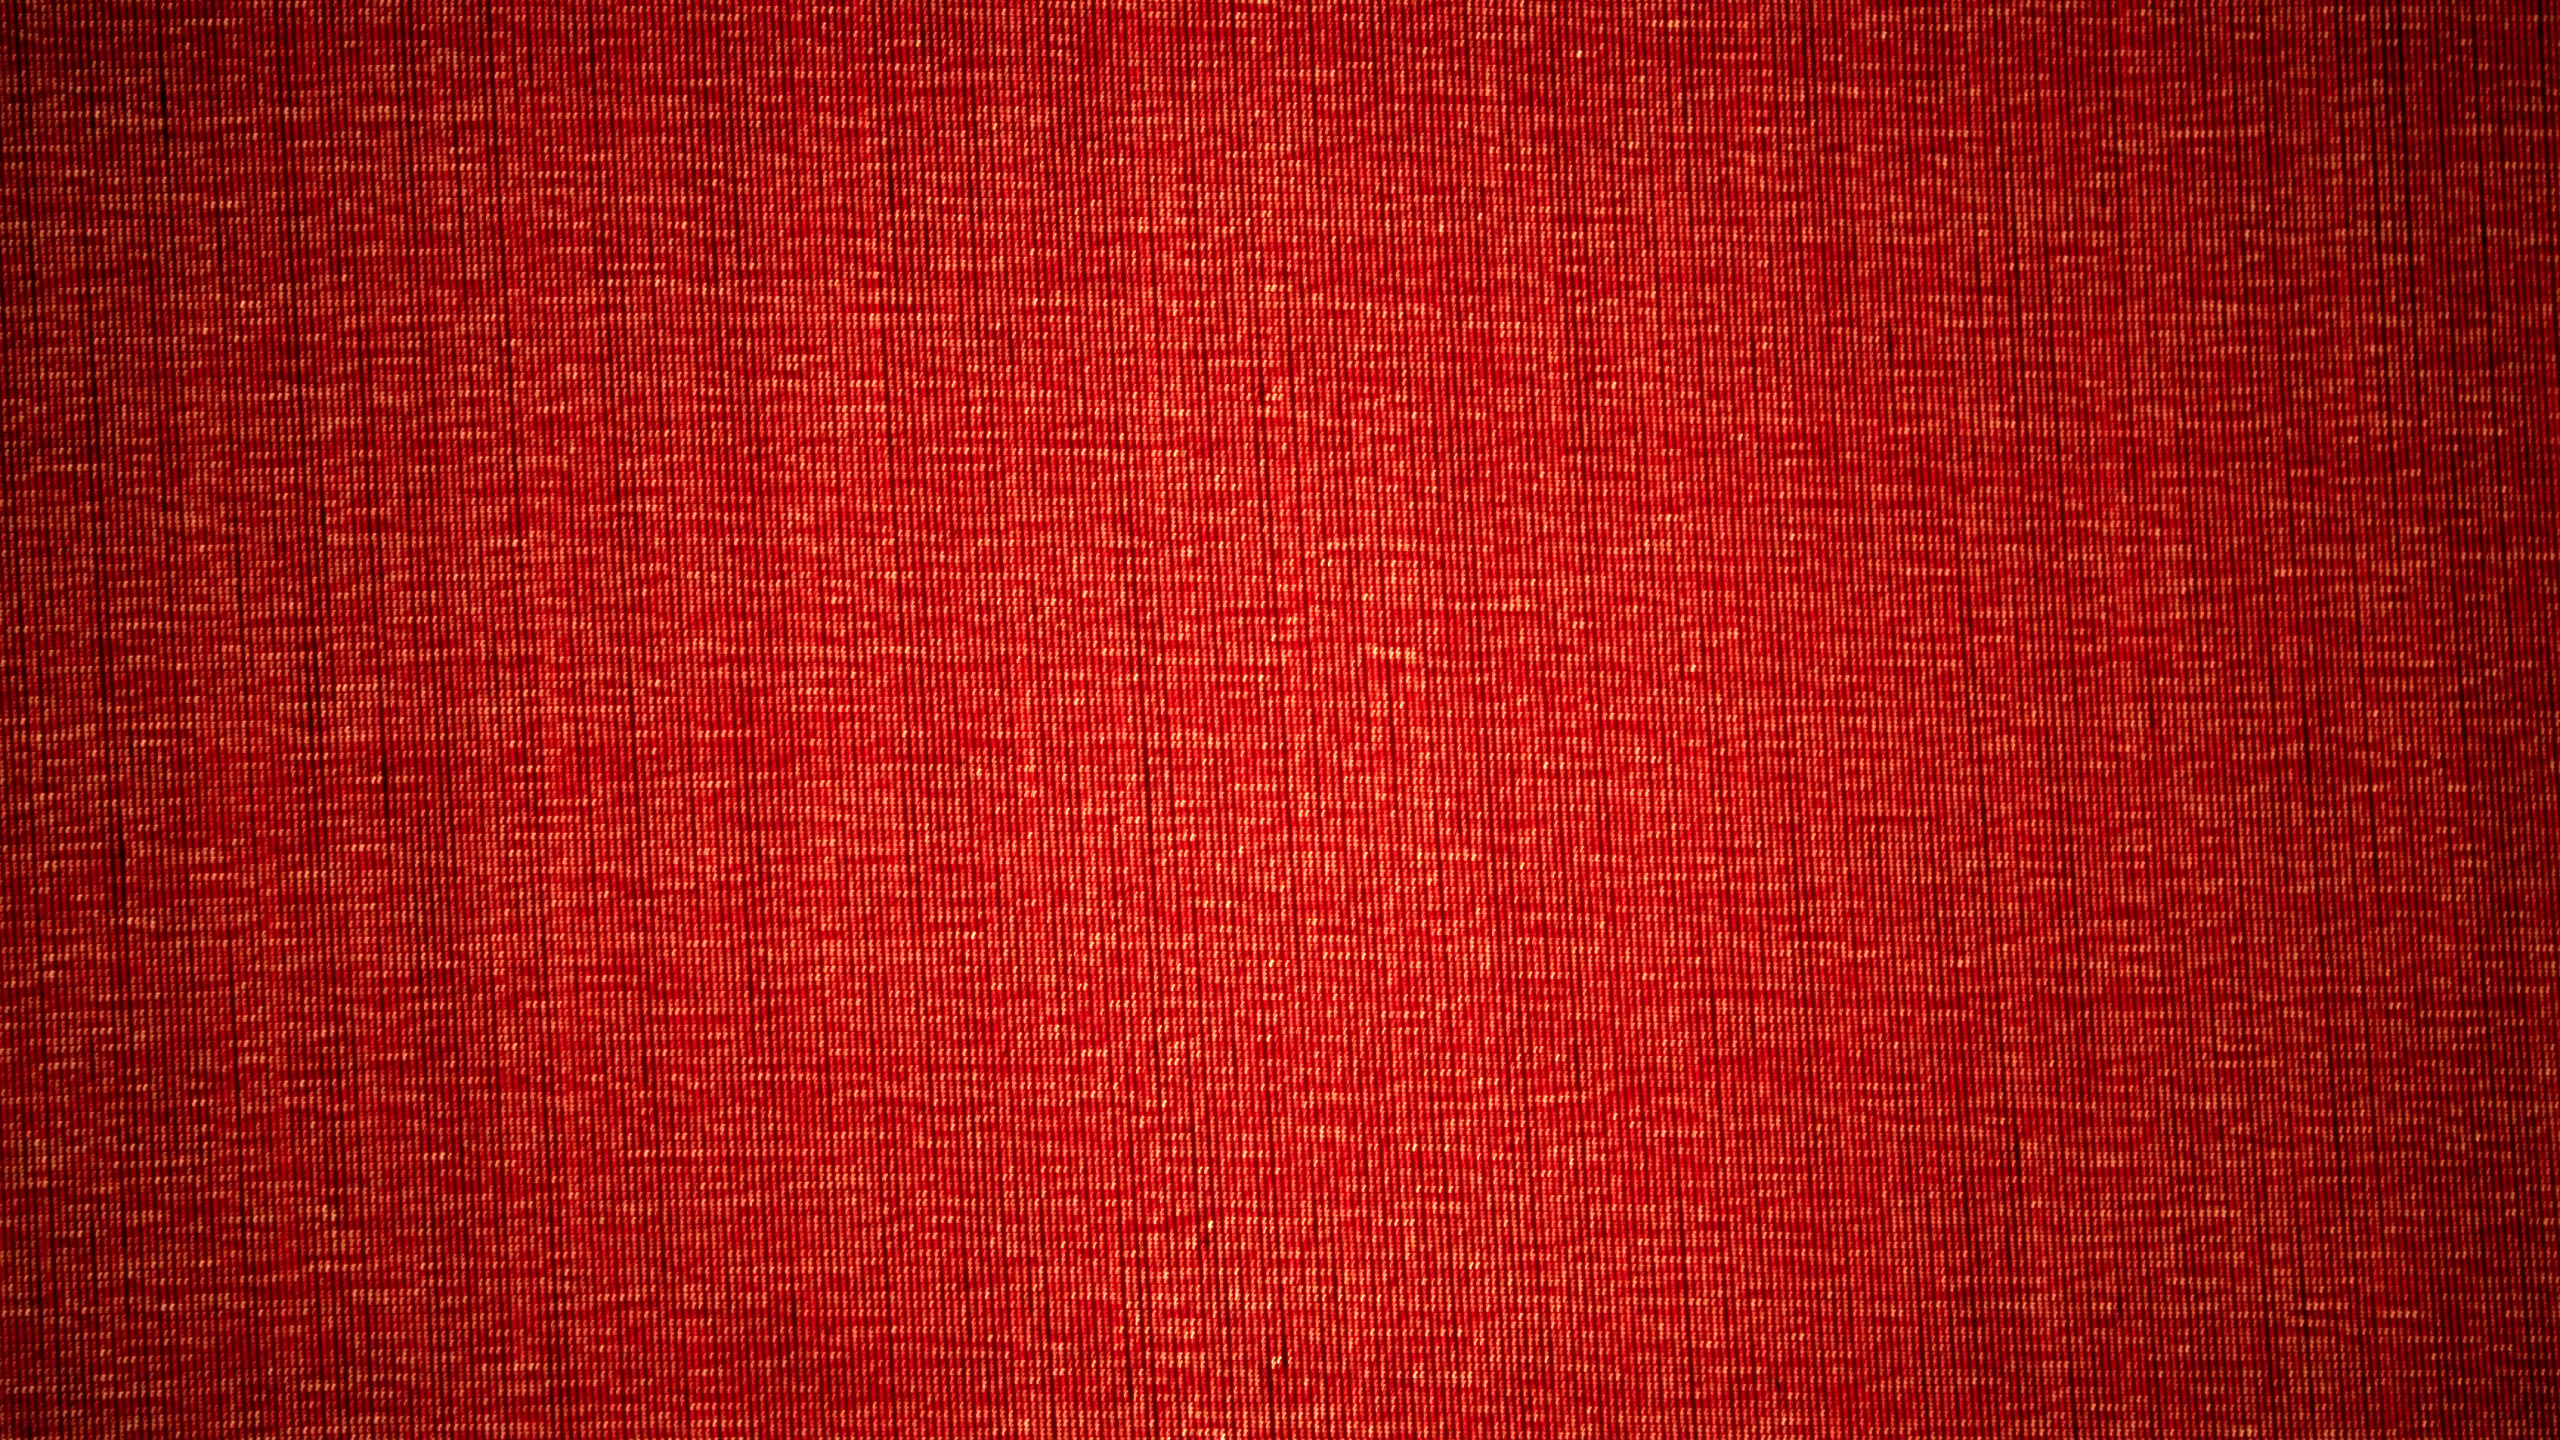 Red Textile in Close up Image. Wallpaper in 2560x1440 Resolution